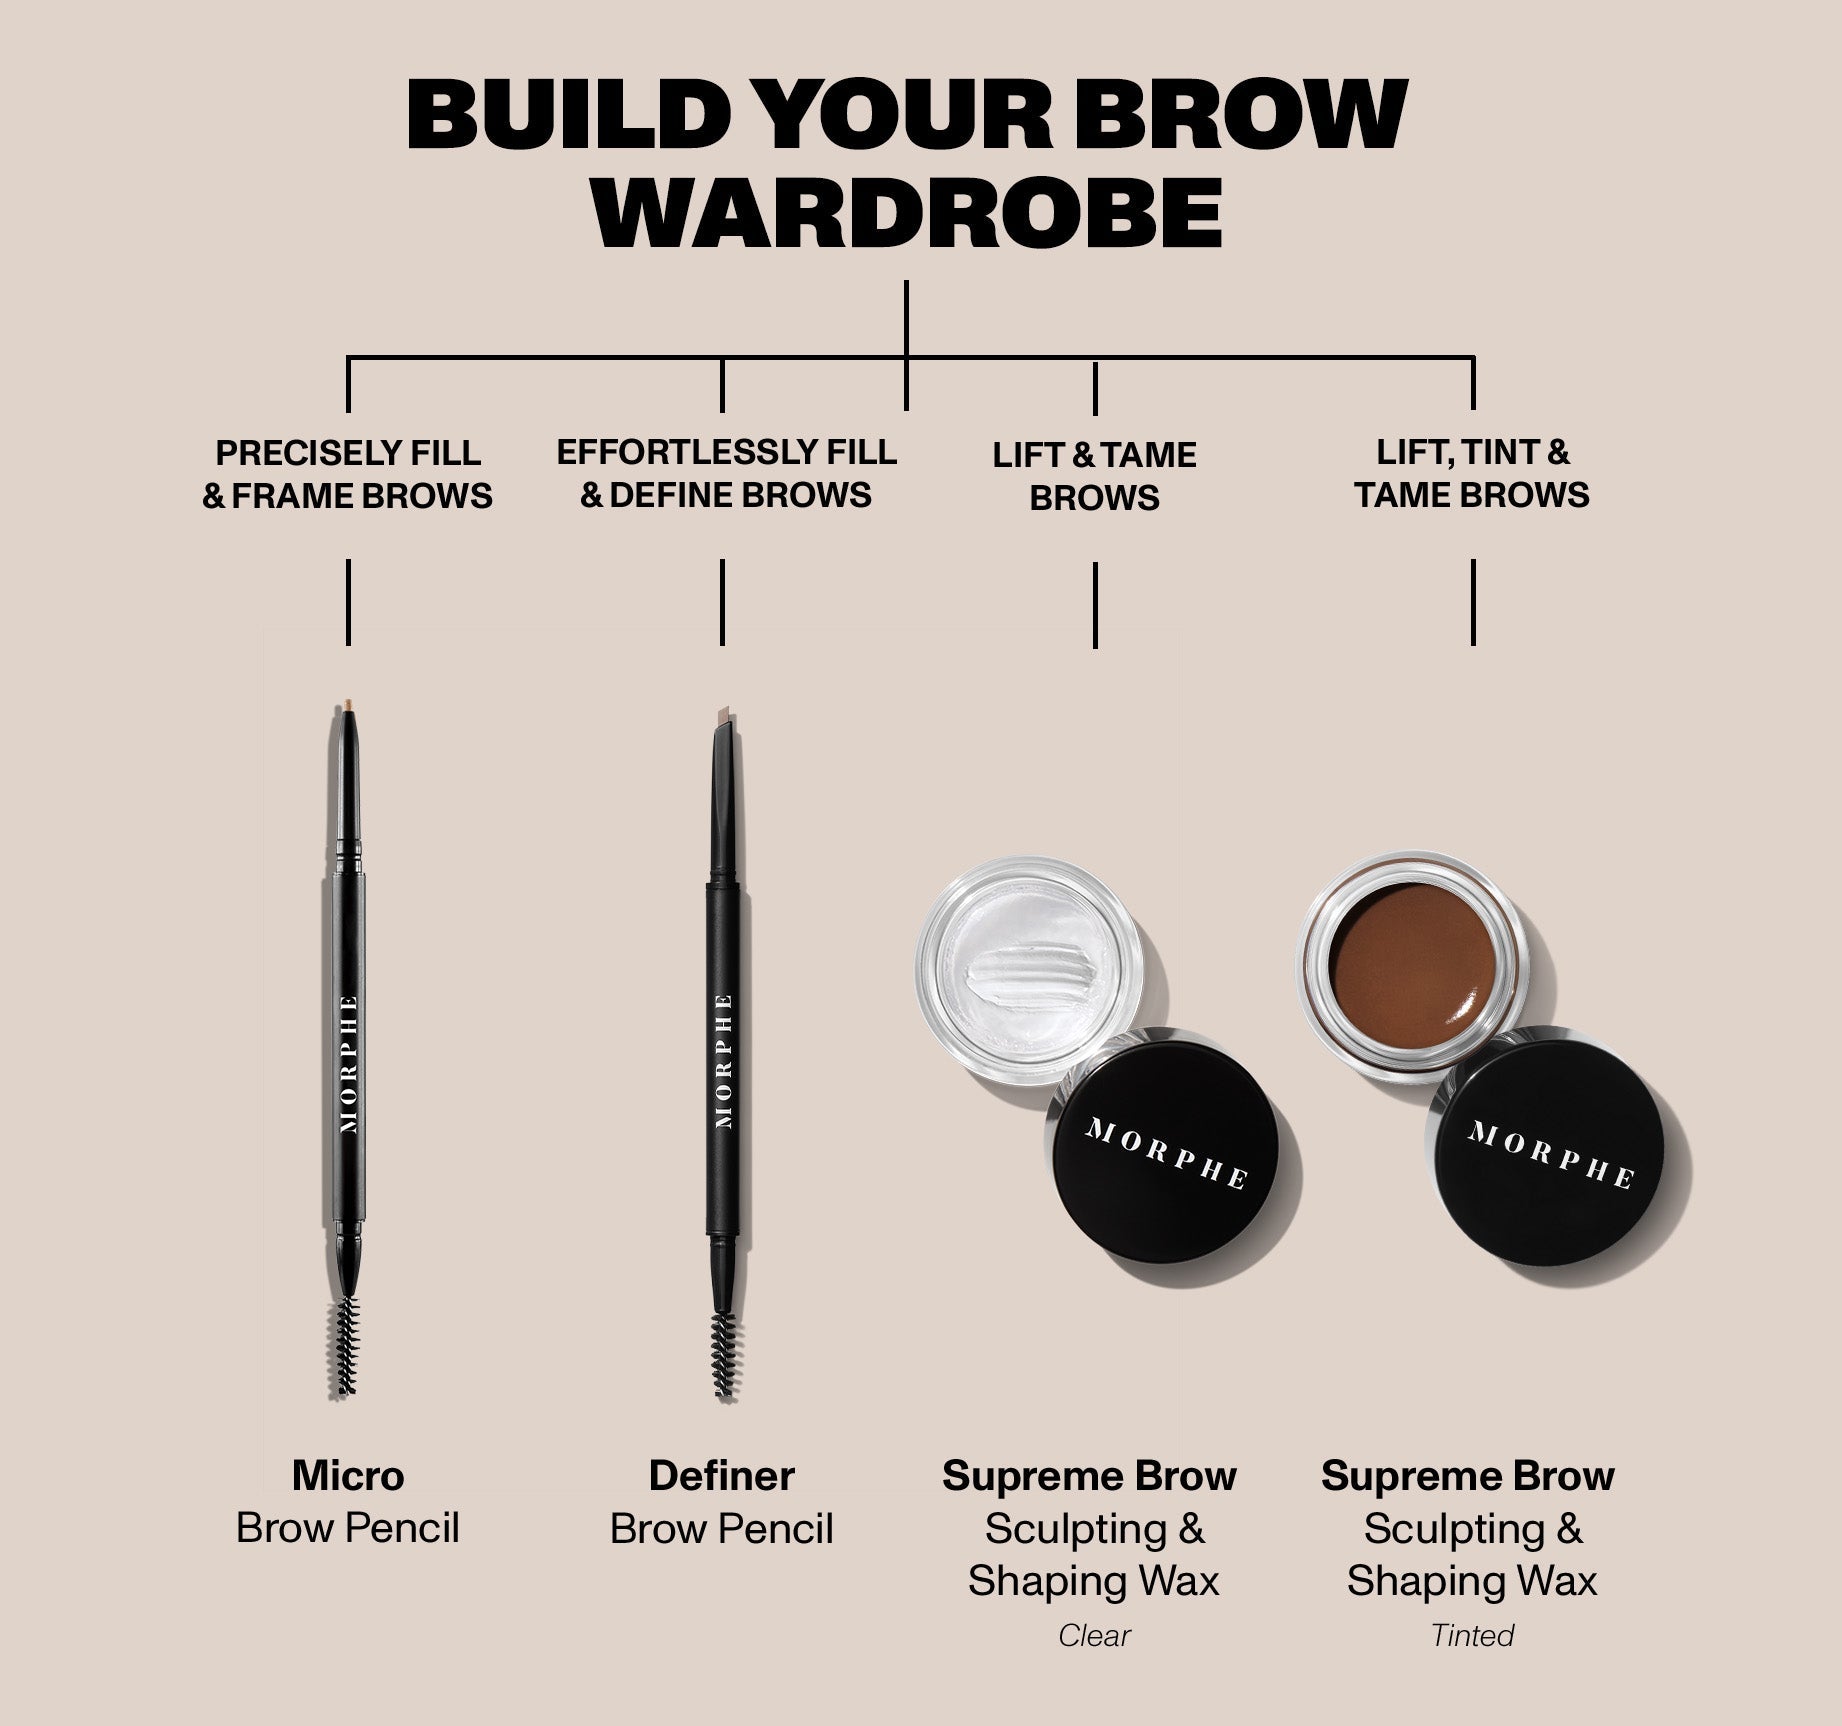 Supreme Brow Sculpting And Shaping Wax - Biscotti - Image 10